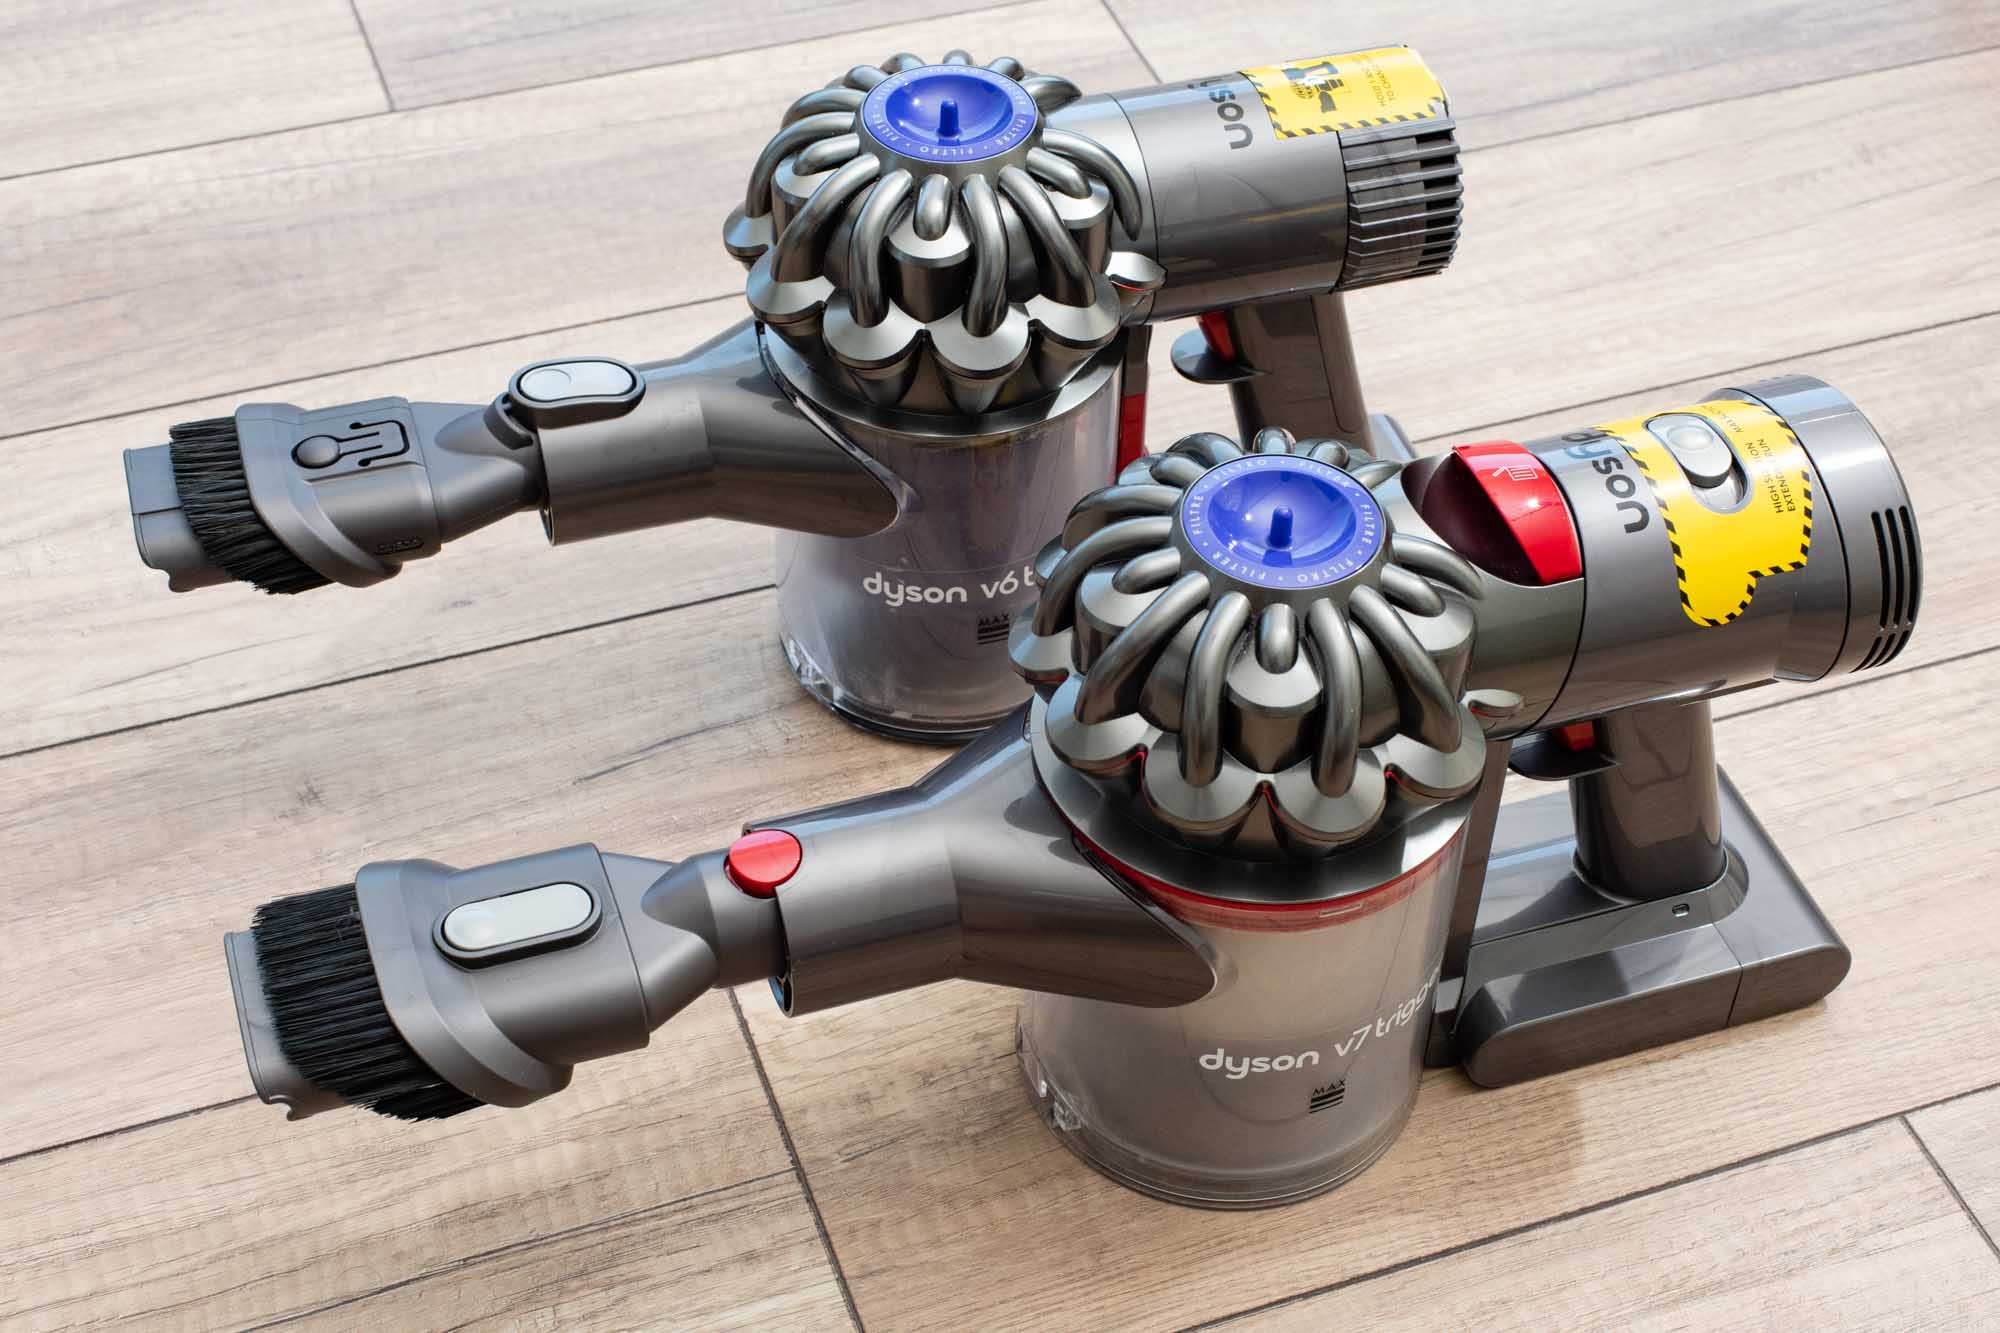 Dyson V7 Trigger Vacuum Review - Your Best Digs